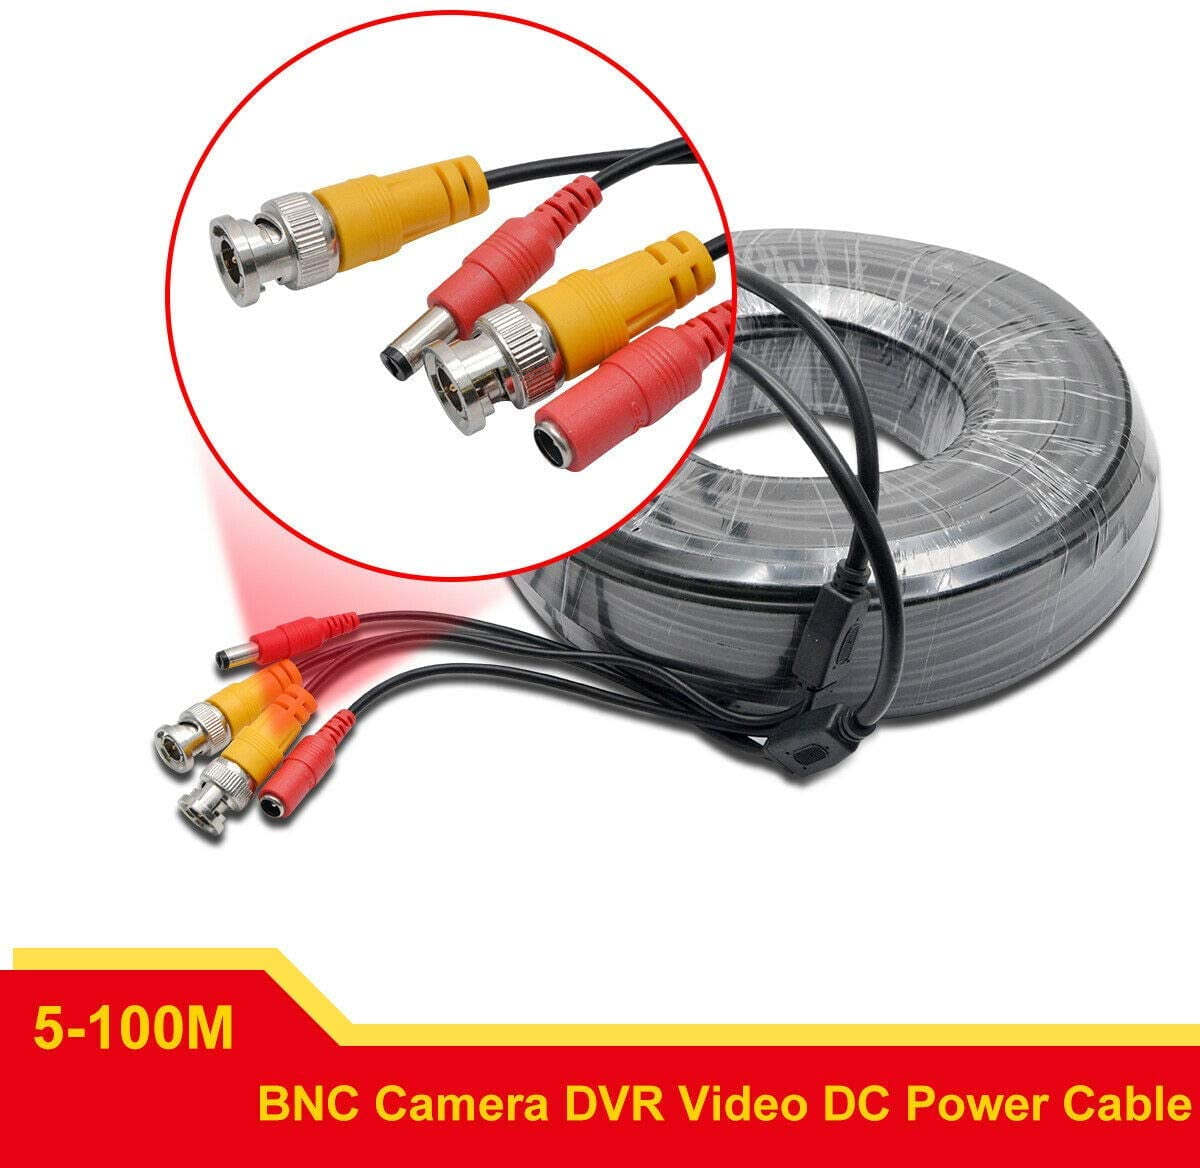 16x 100ft Security Camera BNC Video Power Cable DVR CCTV Surveillance Wire Cord 